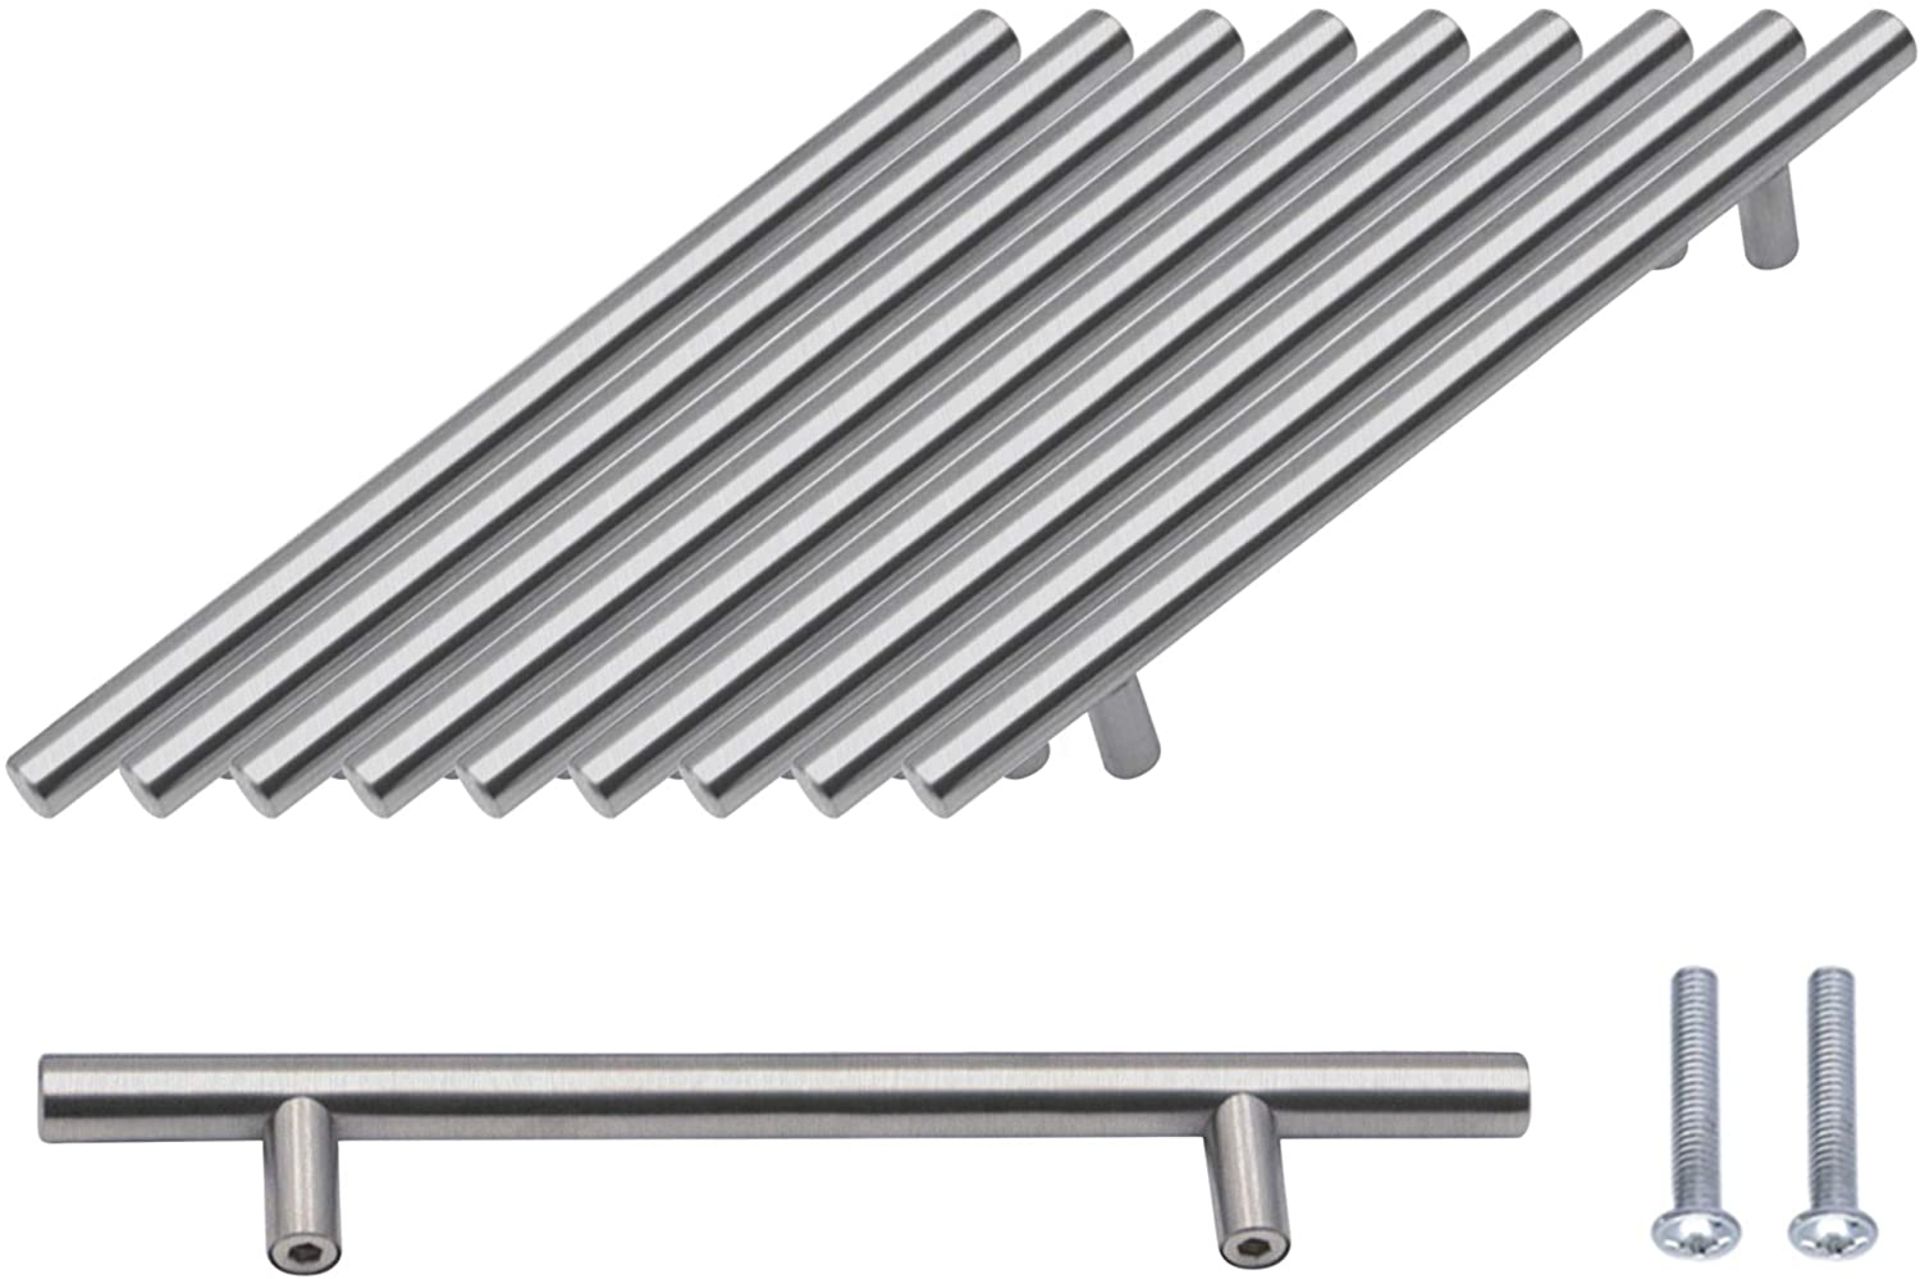 Pack Of 10 Kitchen T-Bar Handles - Image 2 of 2